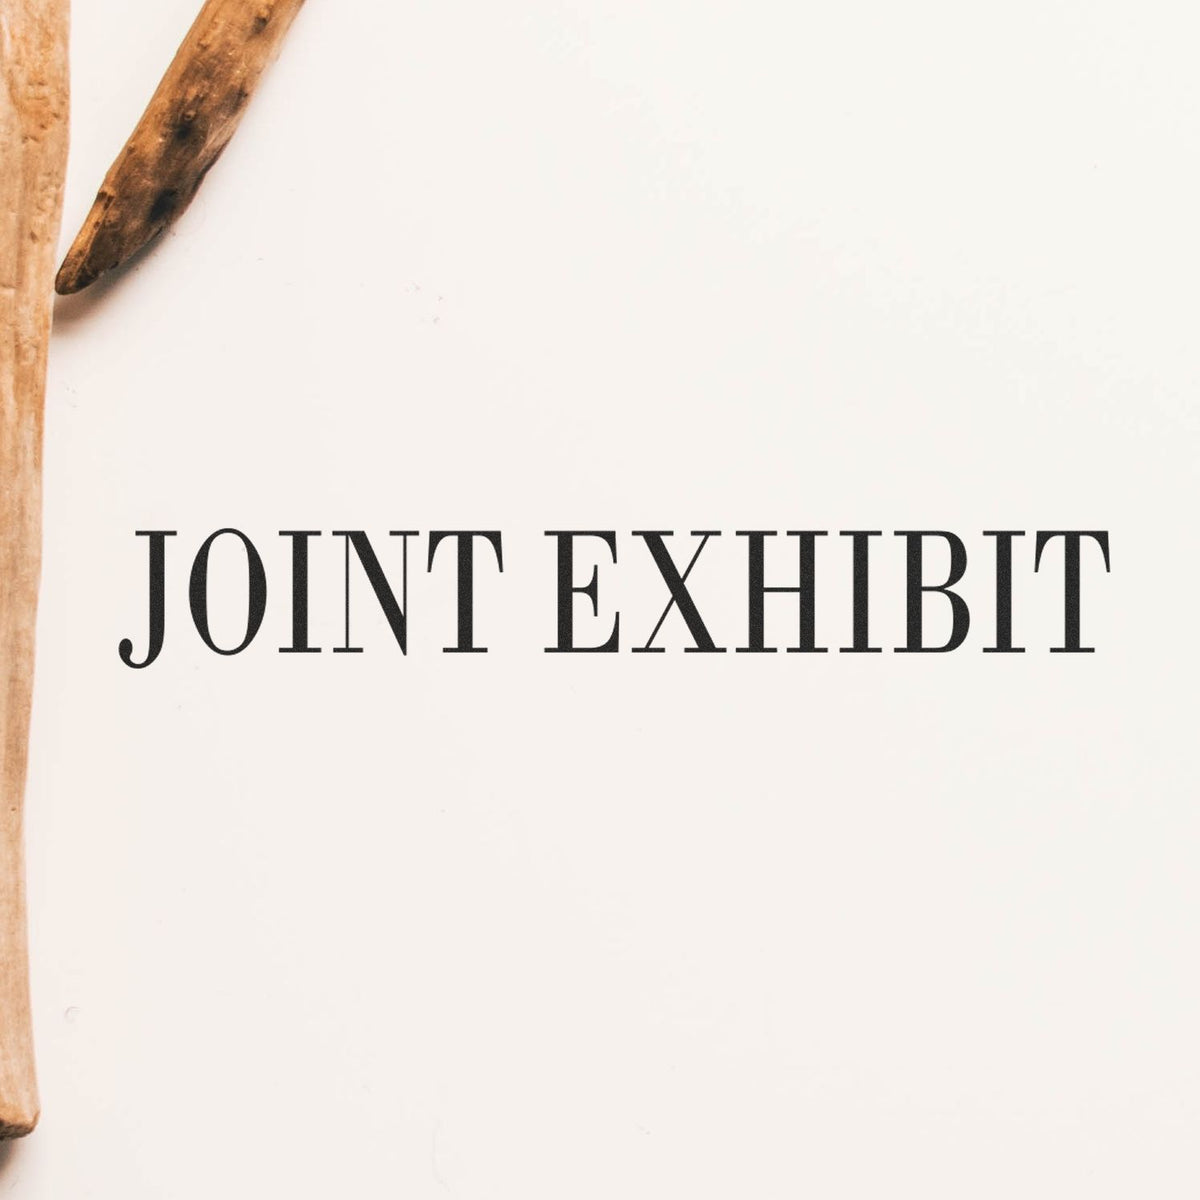 Large Pre-Inked Joint Exhibit Stamp Lifestyle Photo